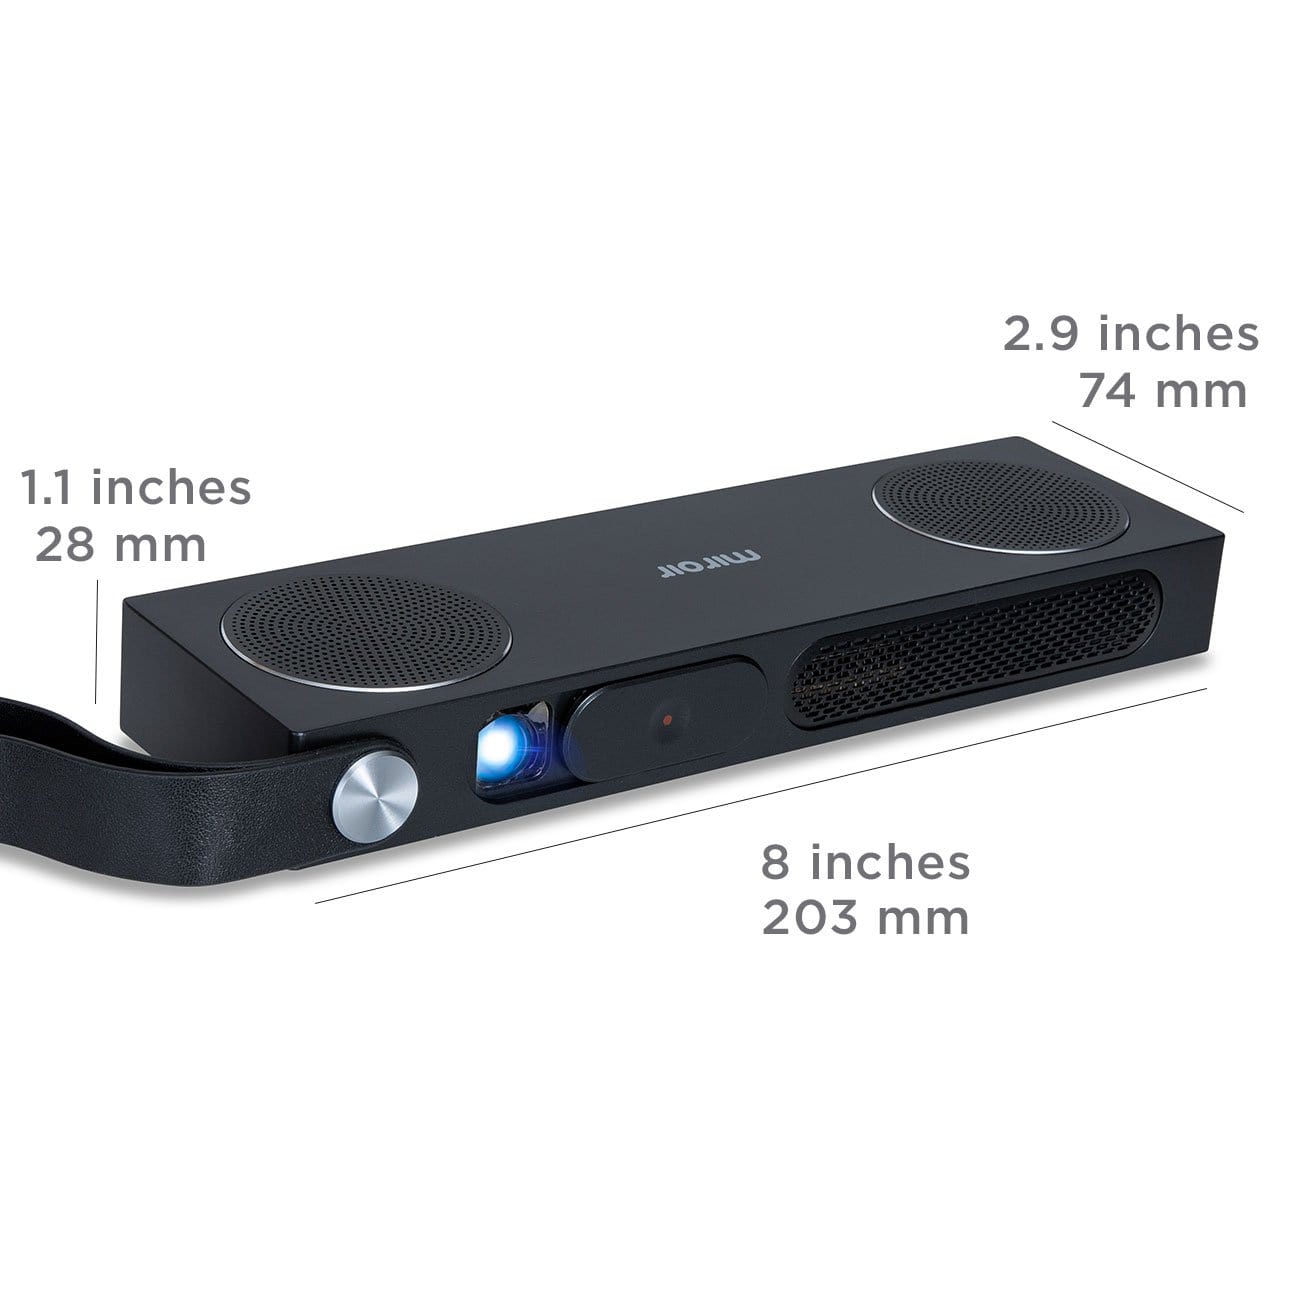 Miroir M280A Smart WiFi, Bluetooth, Portable LED Projector, Dual Speakers, Netflix and Other App's, HDMI, USB Type A Reader,Battery-Powered